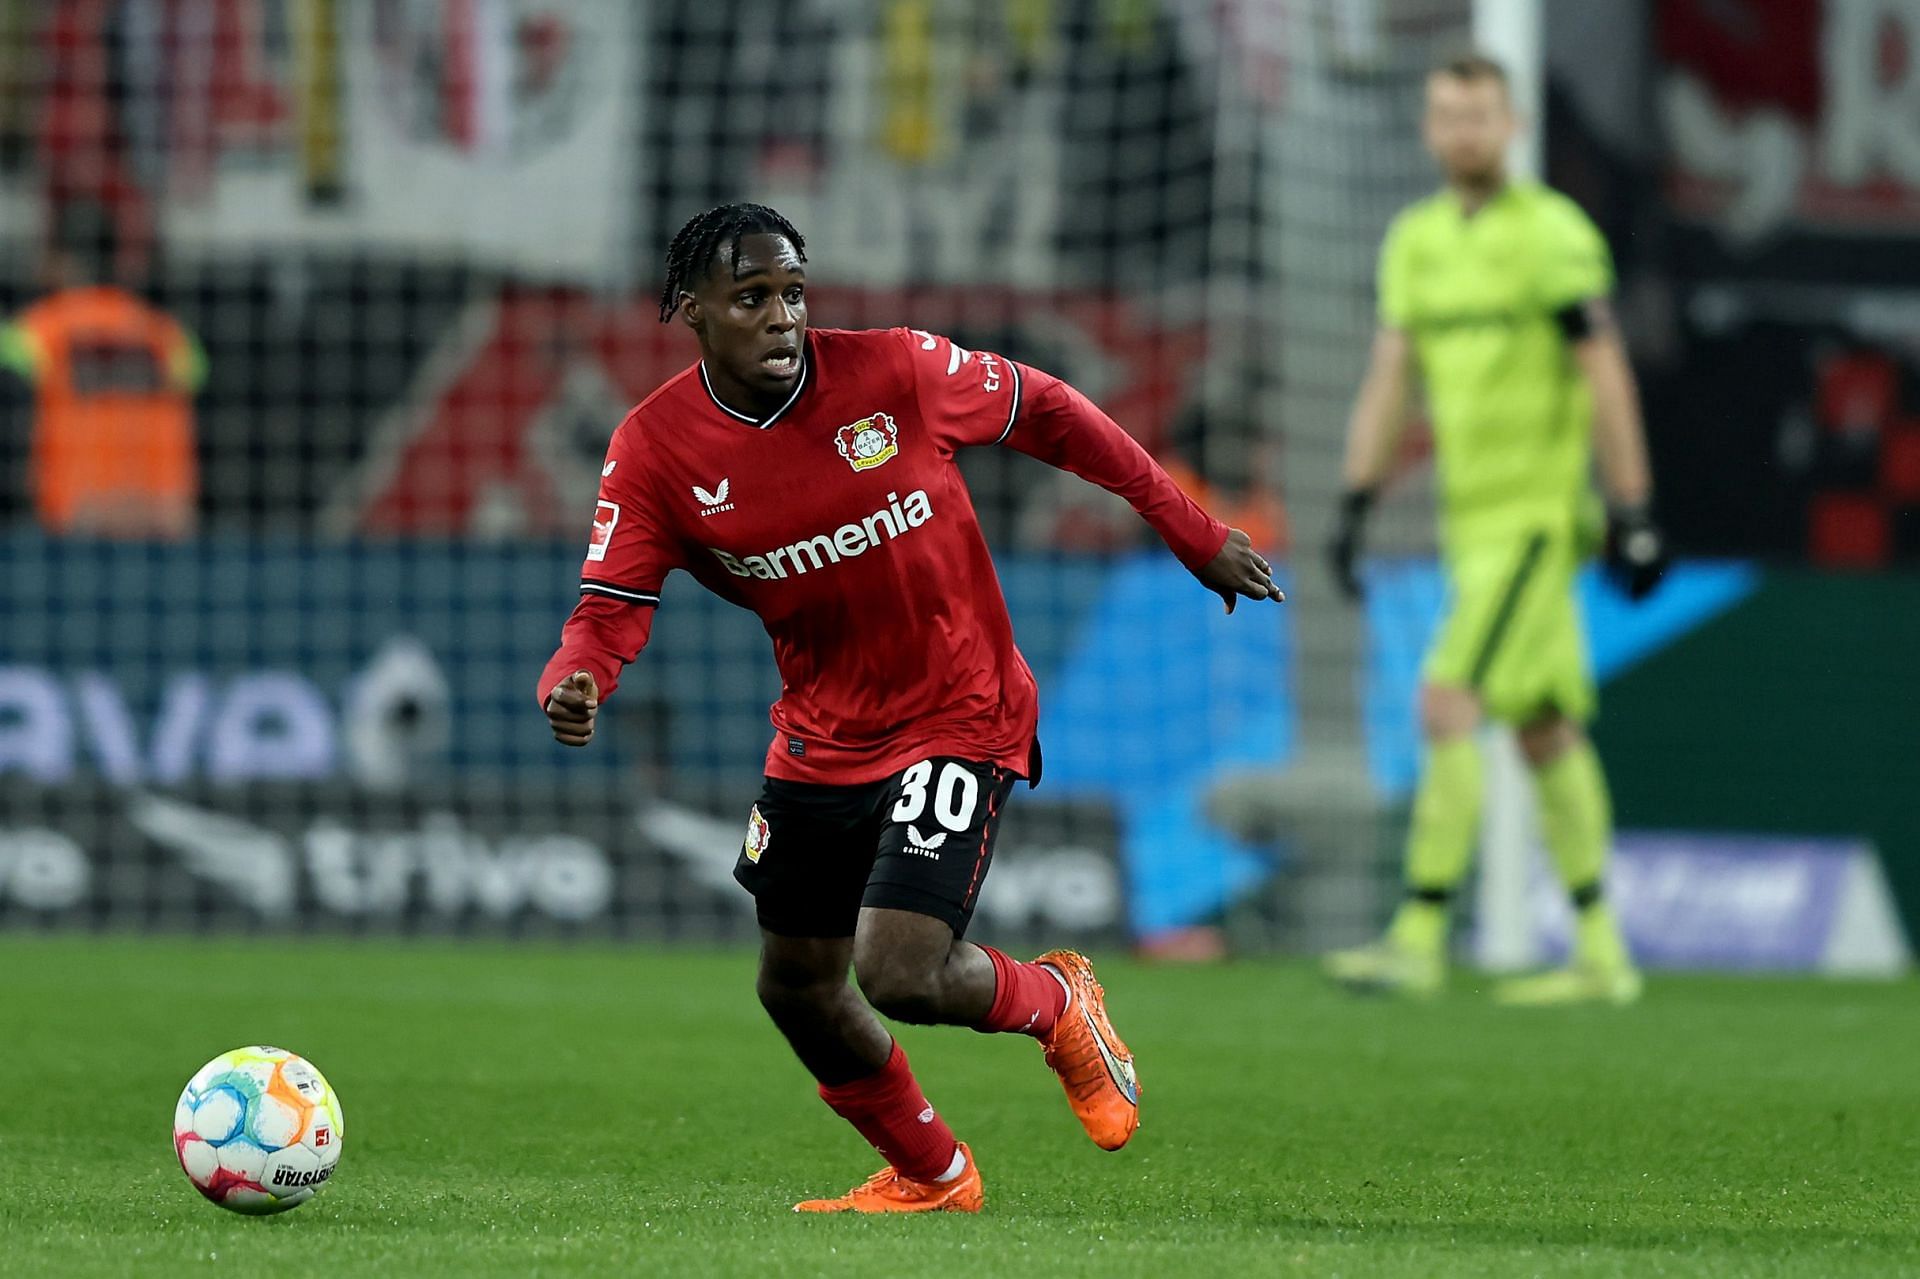 Jeremie Frimpong has registered eight goals and six assists in Bundesliga